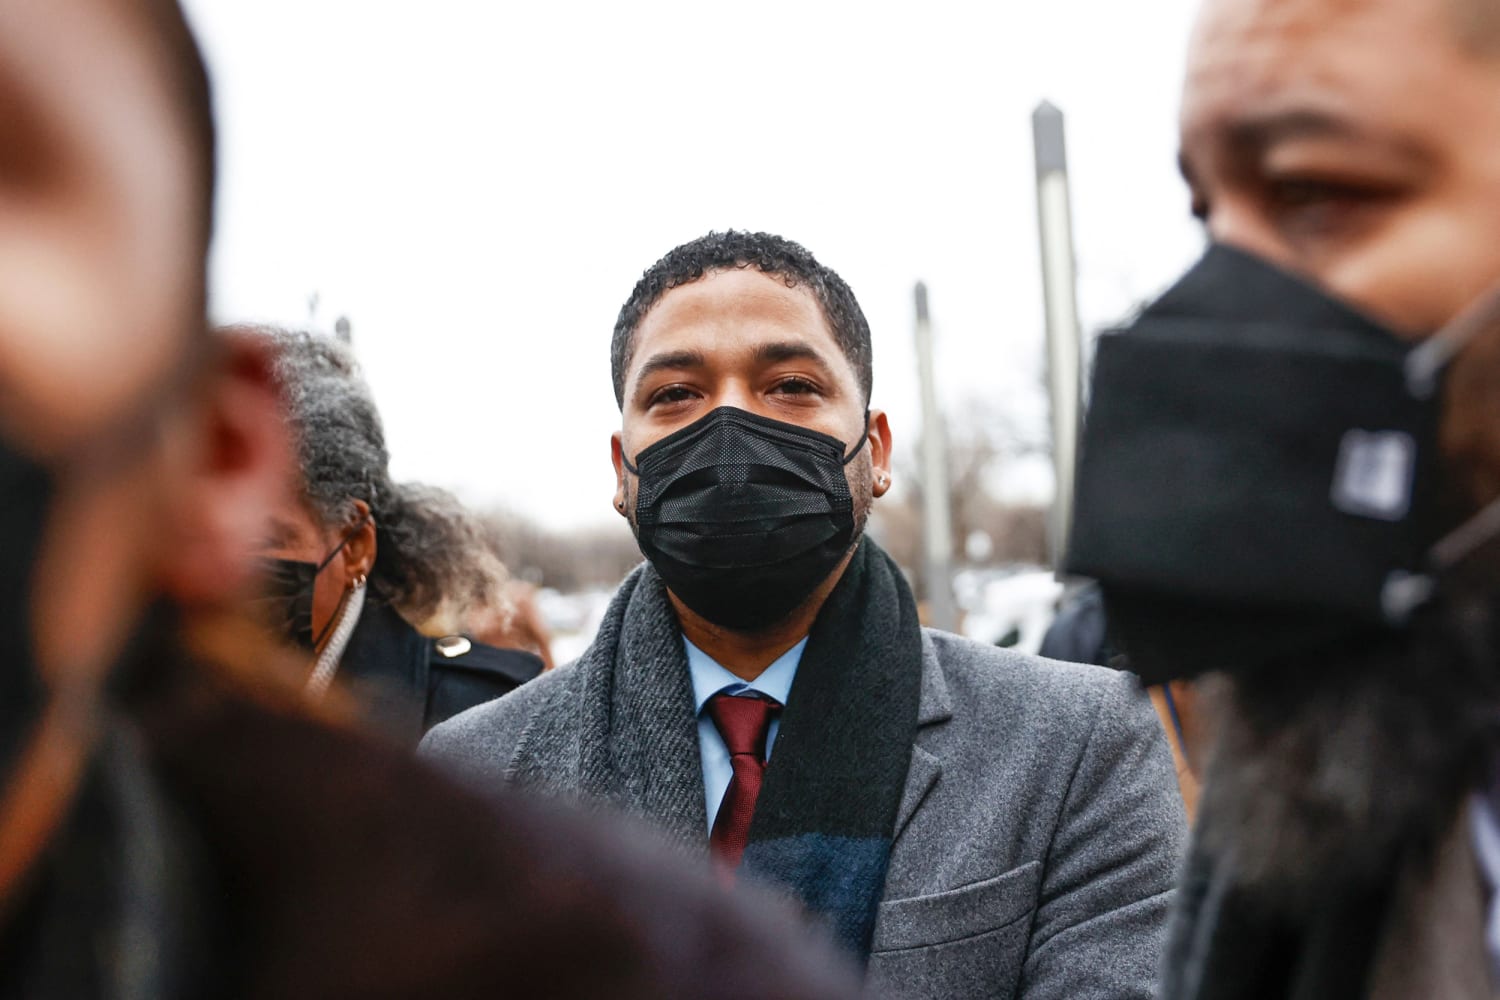 Jussie Smollett testifies he did drugs, masturbated at club with alleged accomplice